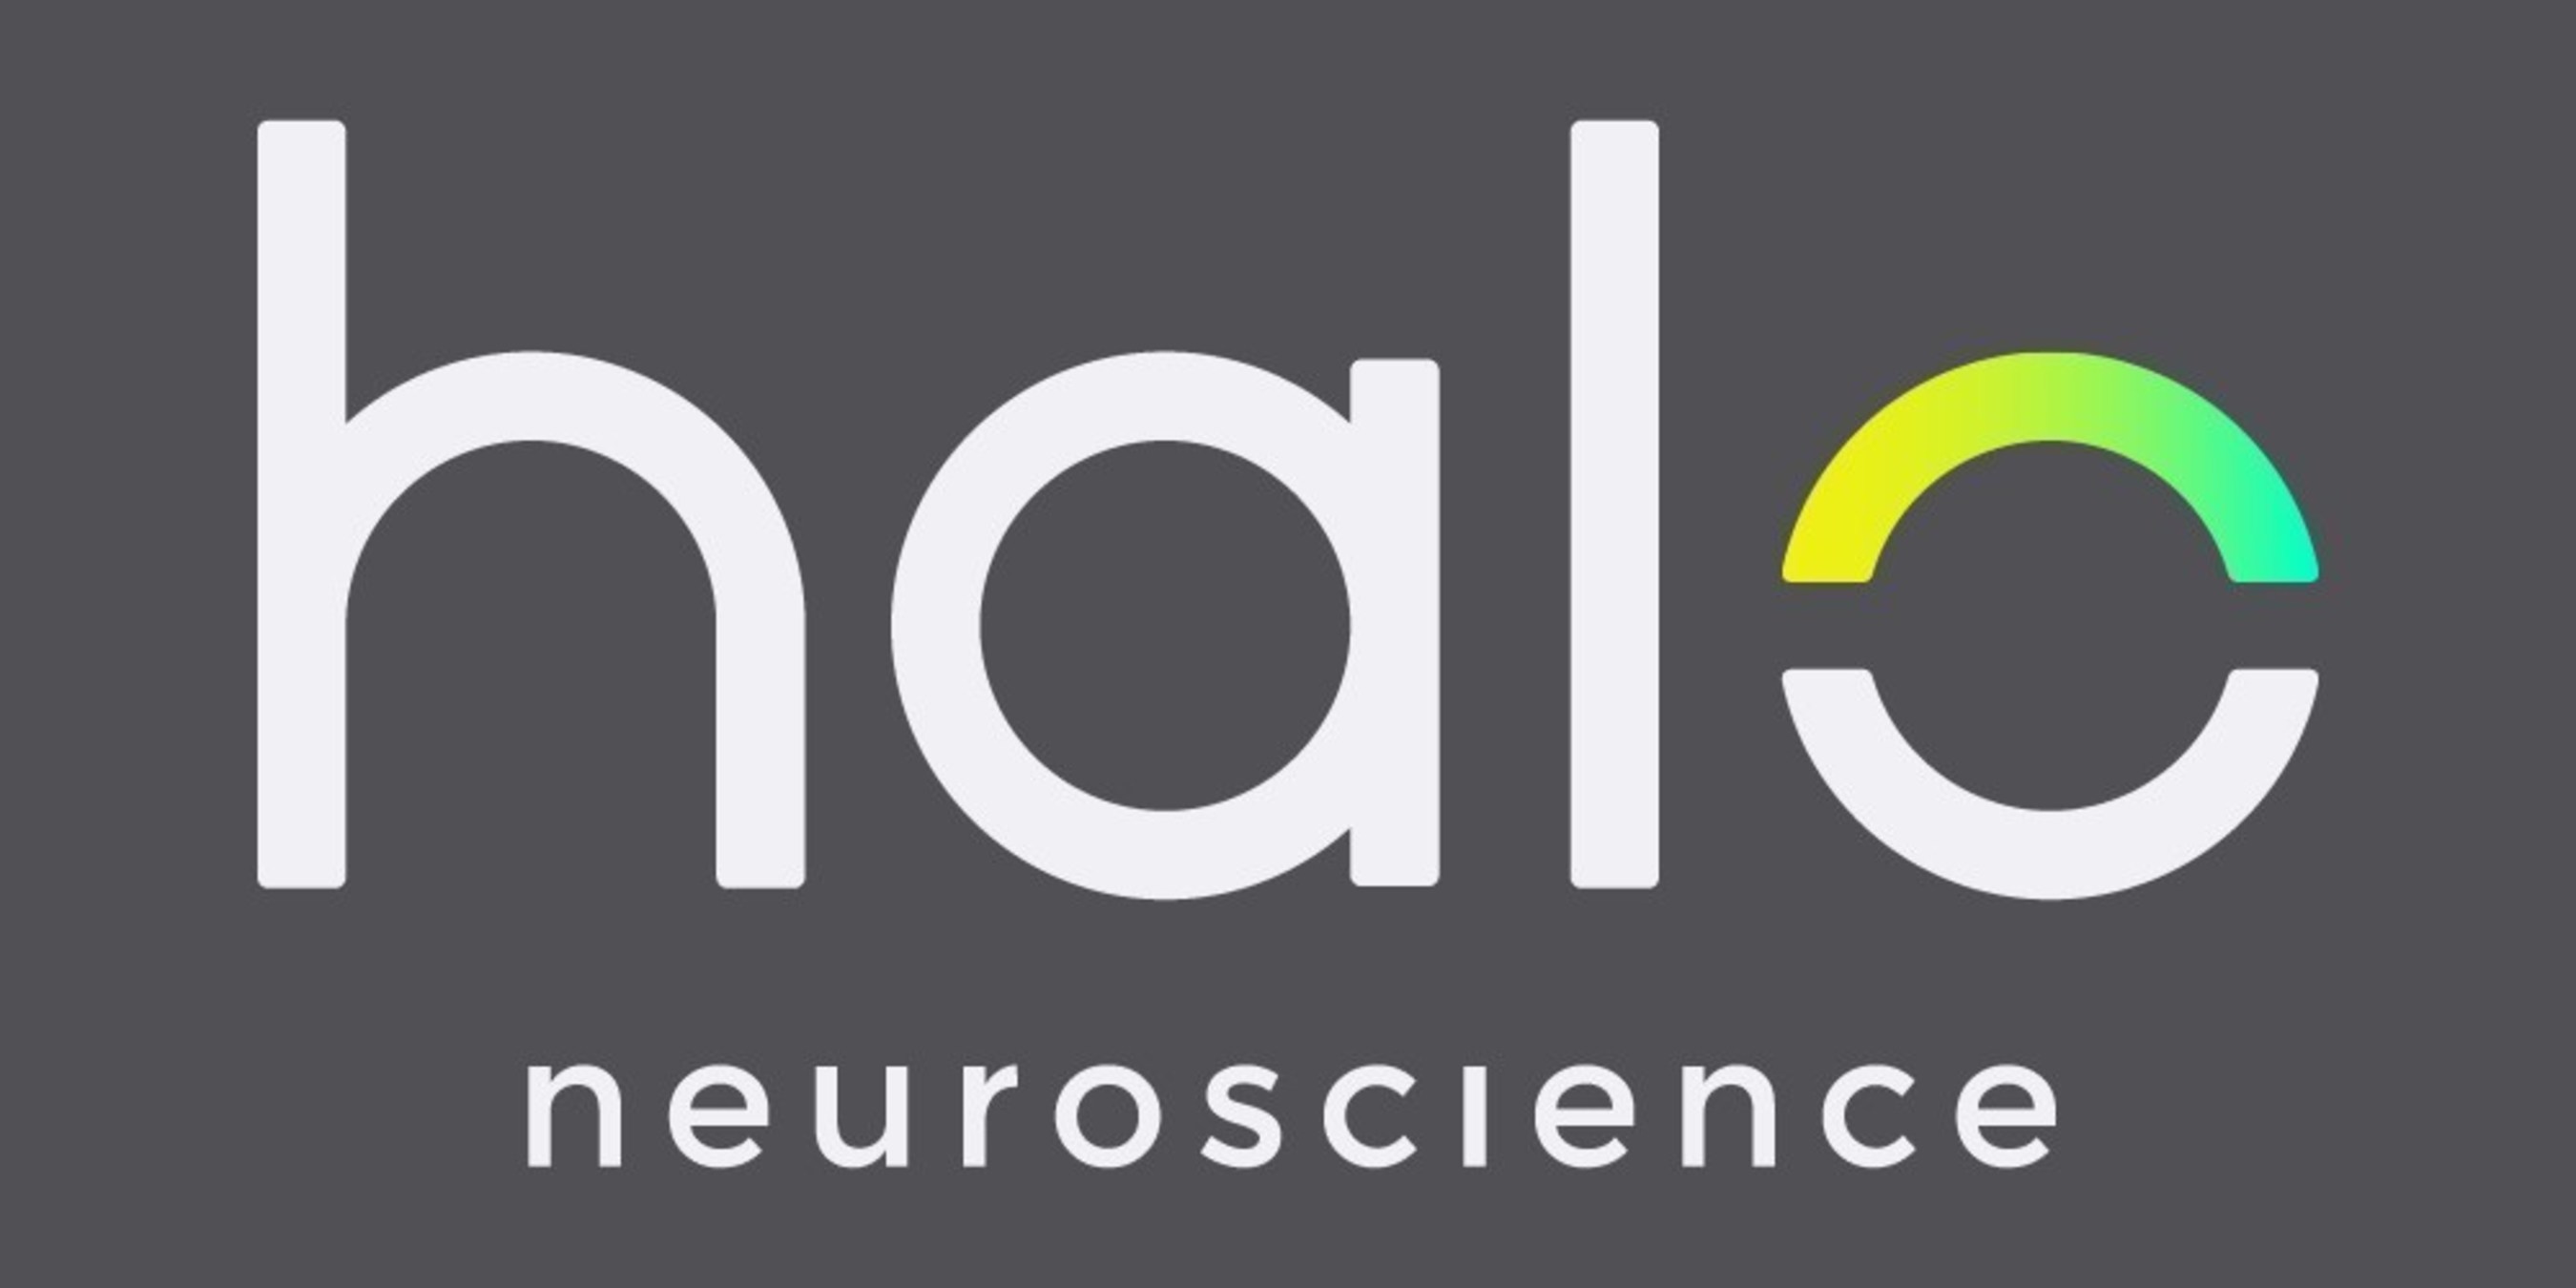 Halo Neuroscience develops neurotechnology to unlock human potential in both the healthy and impaired.